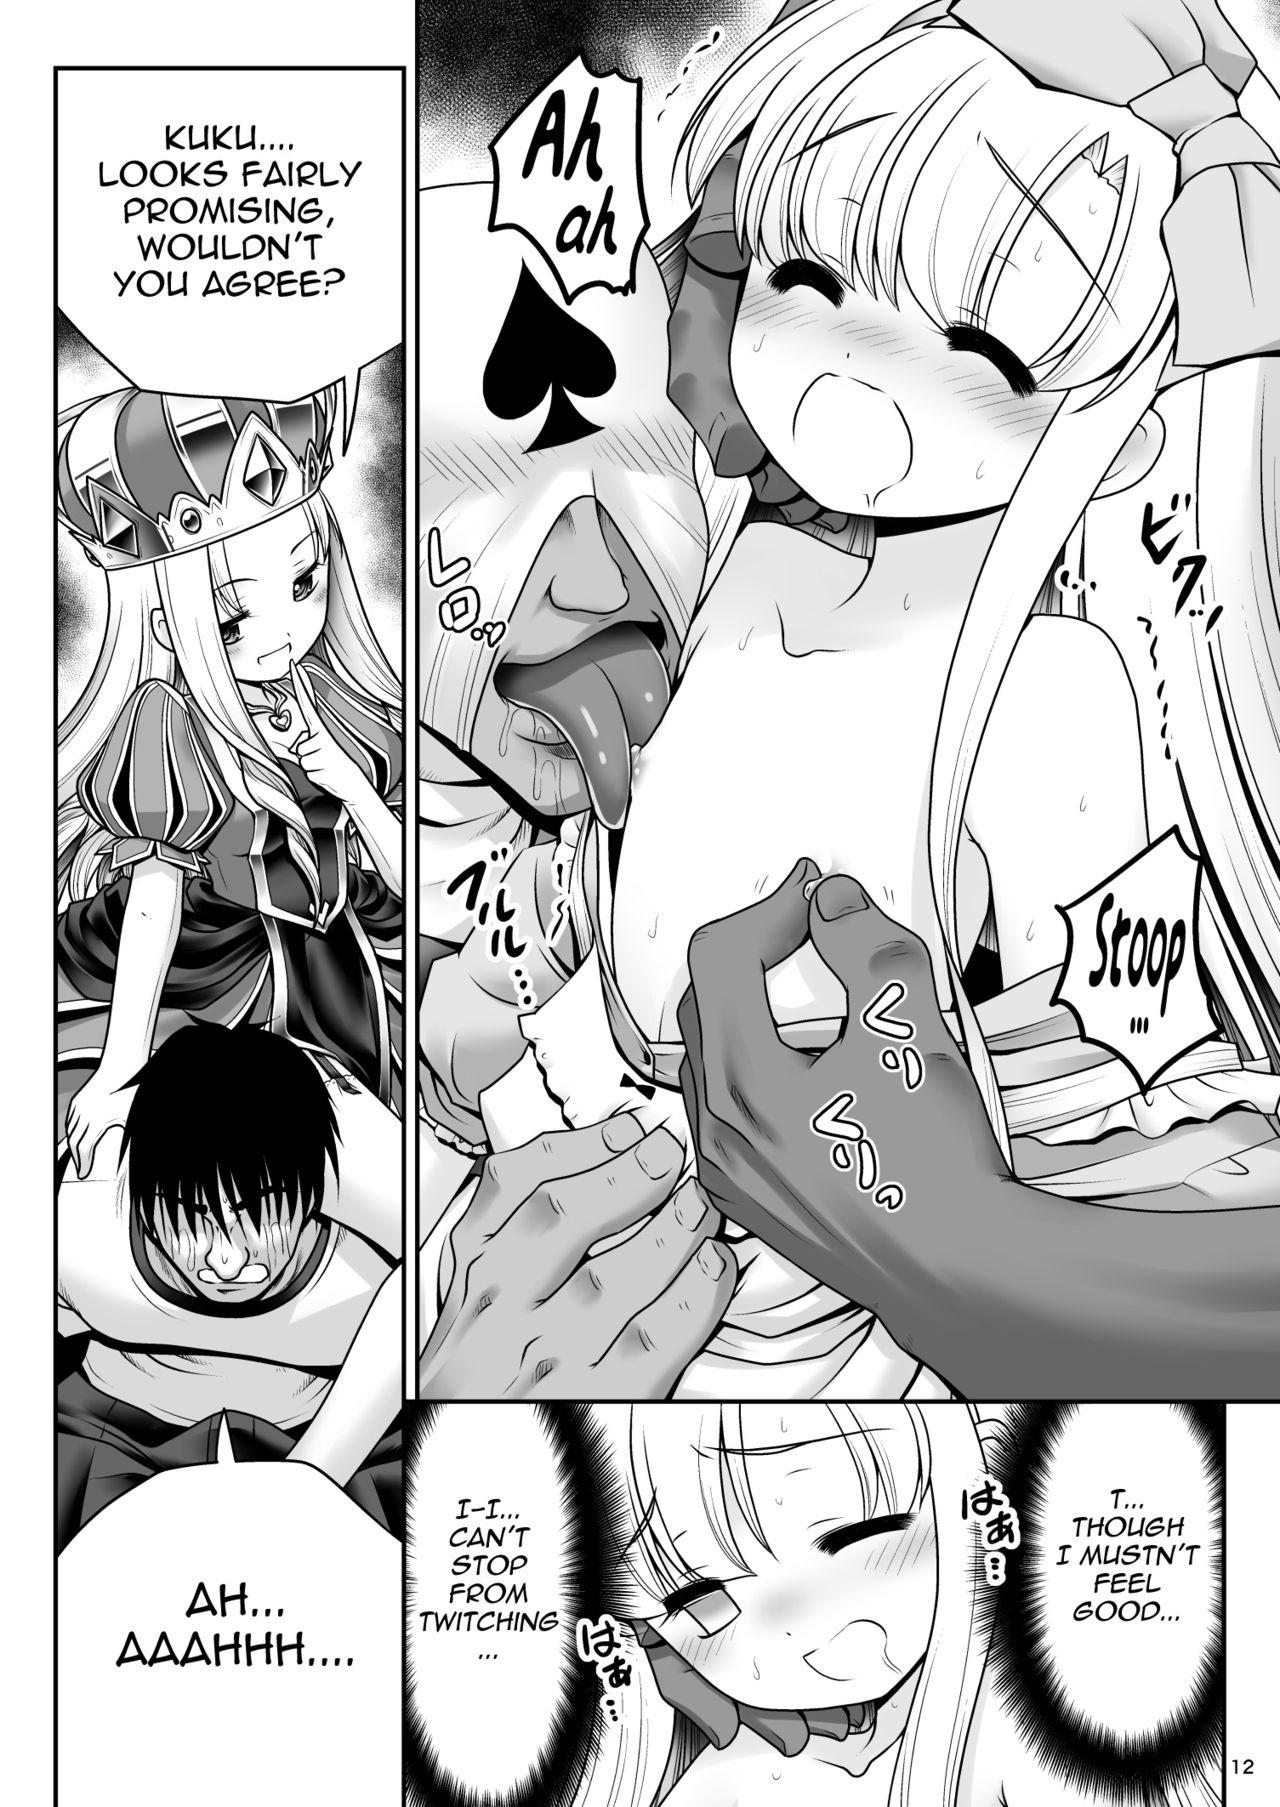 Periscope Heart no Joou to Alice Inkou Saiban ver 1.1 - Alice in wonderland Mulher - Page 11